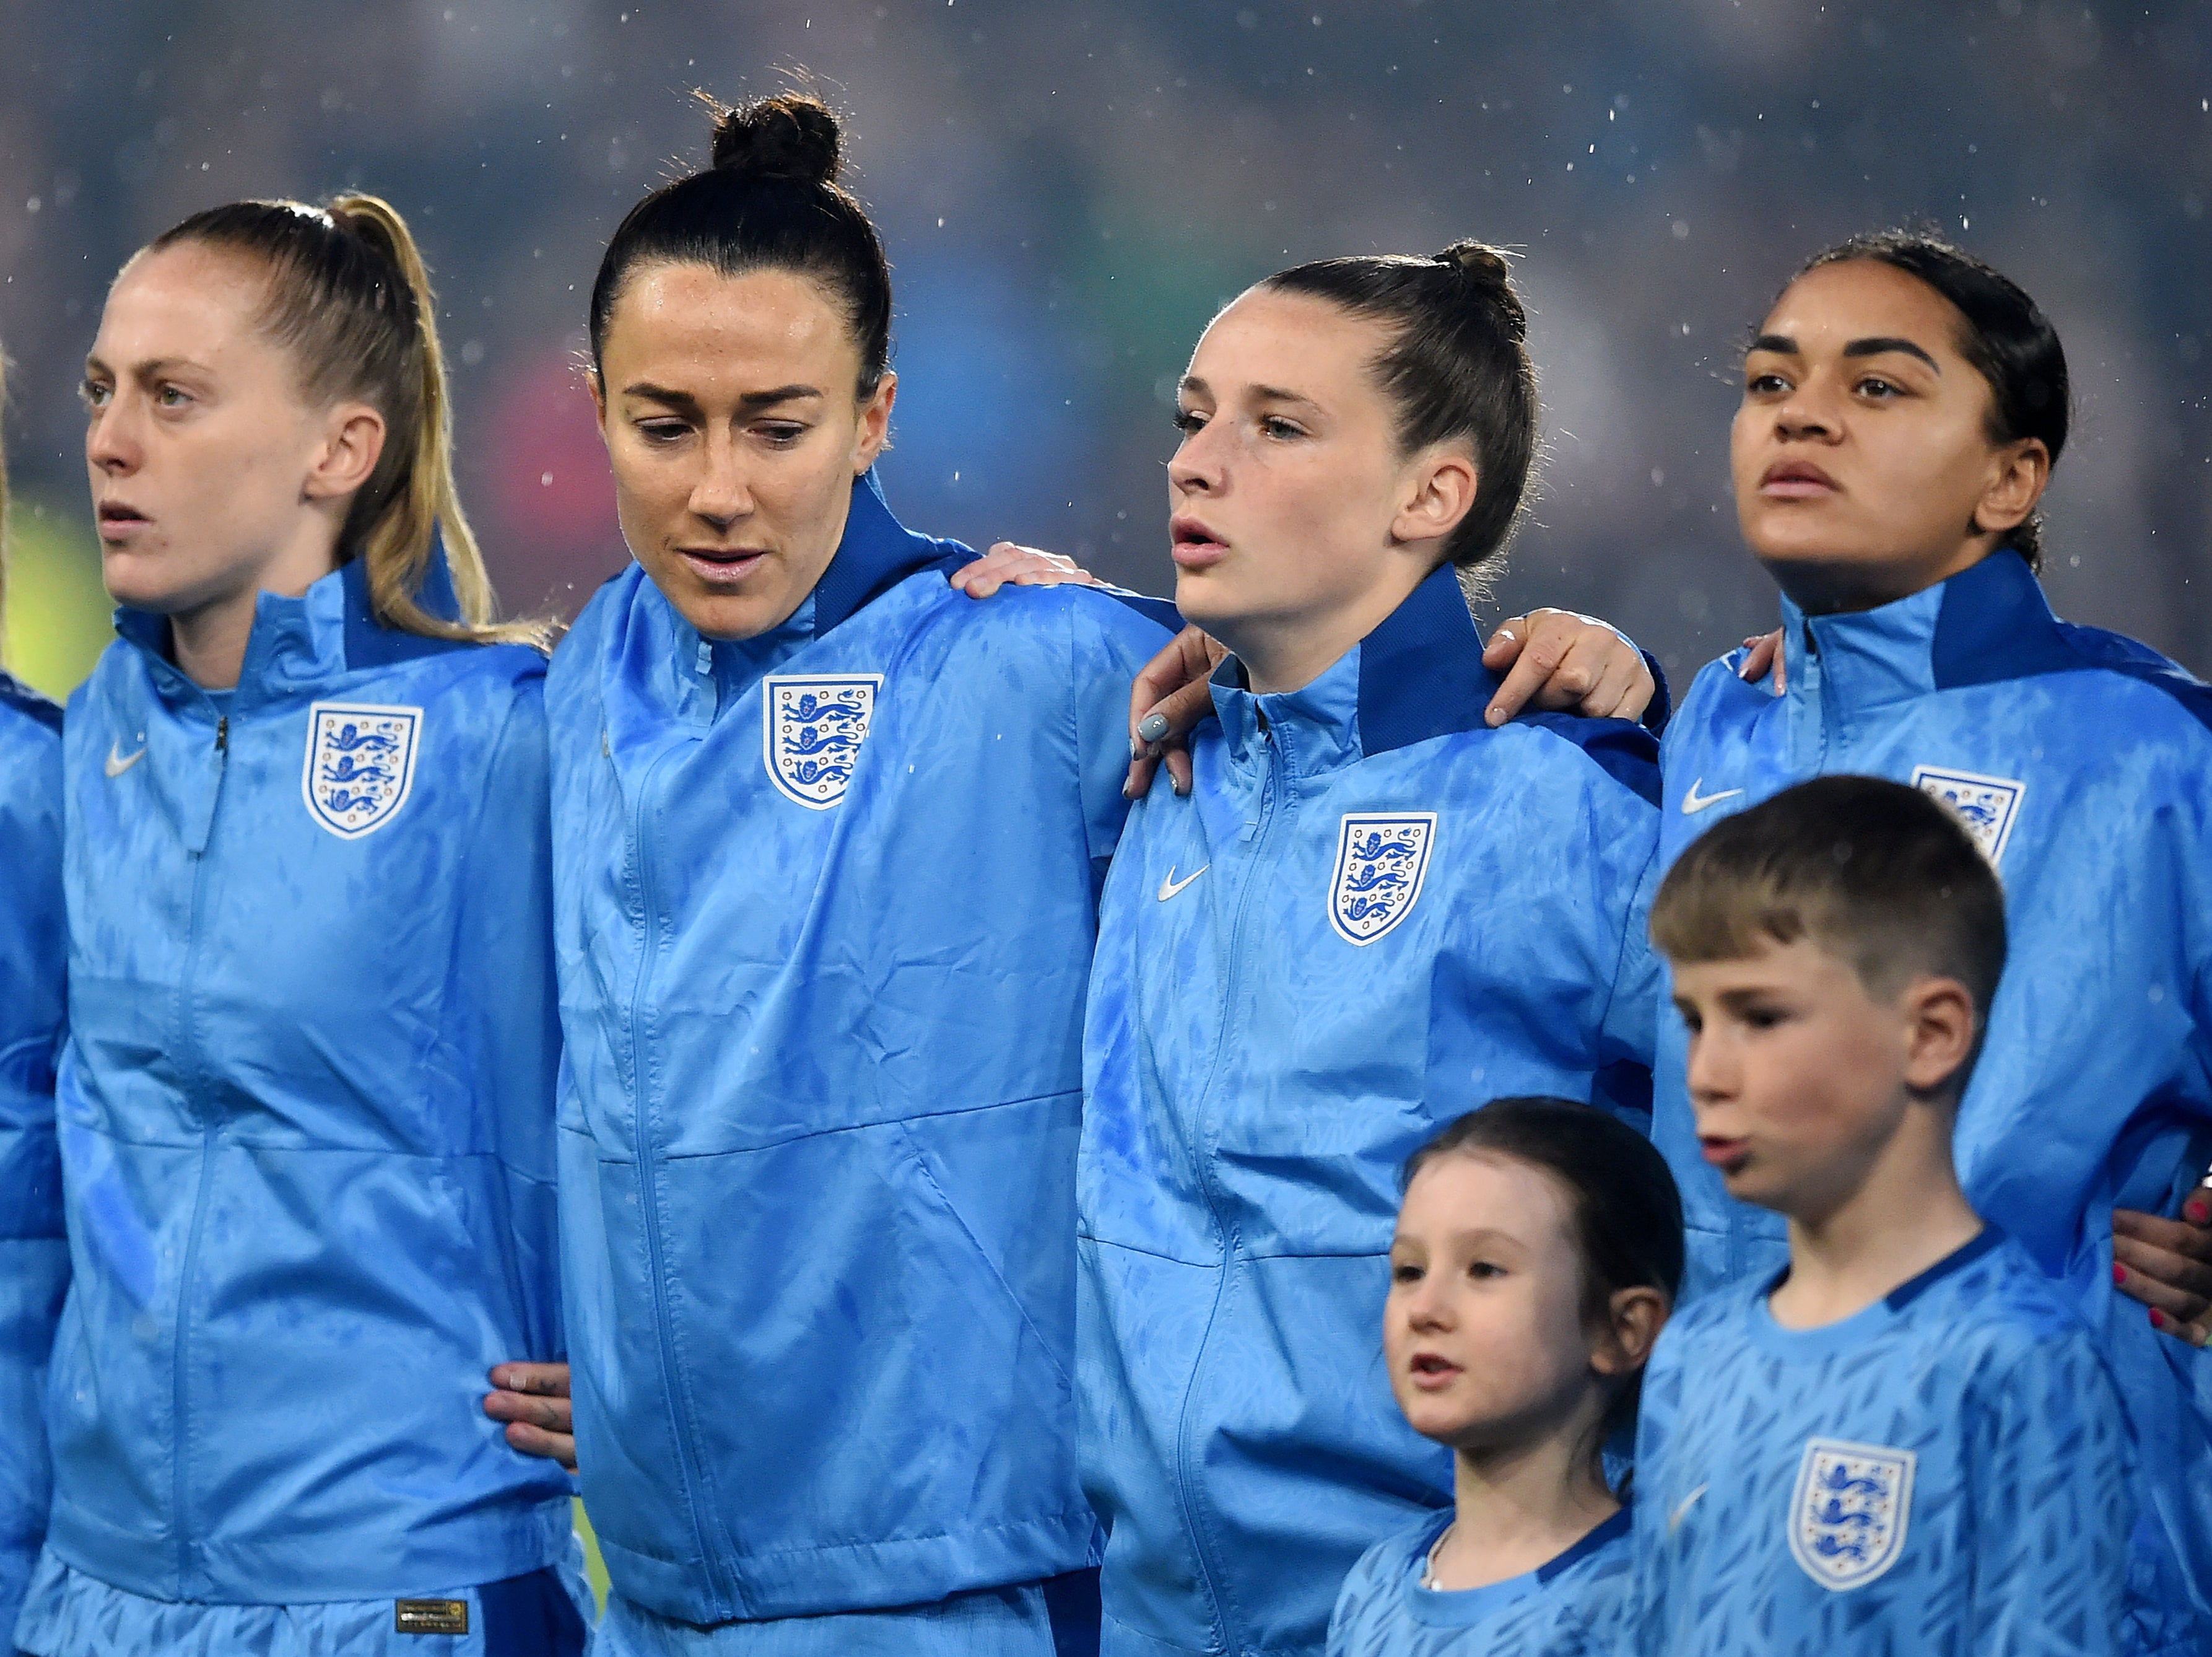 The England players’ situation over World Cup bonuses may not be resolved until after the tournament